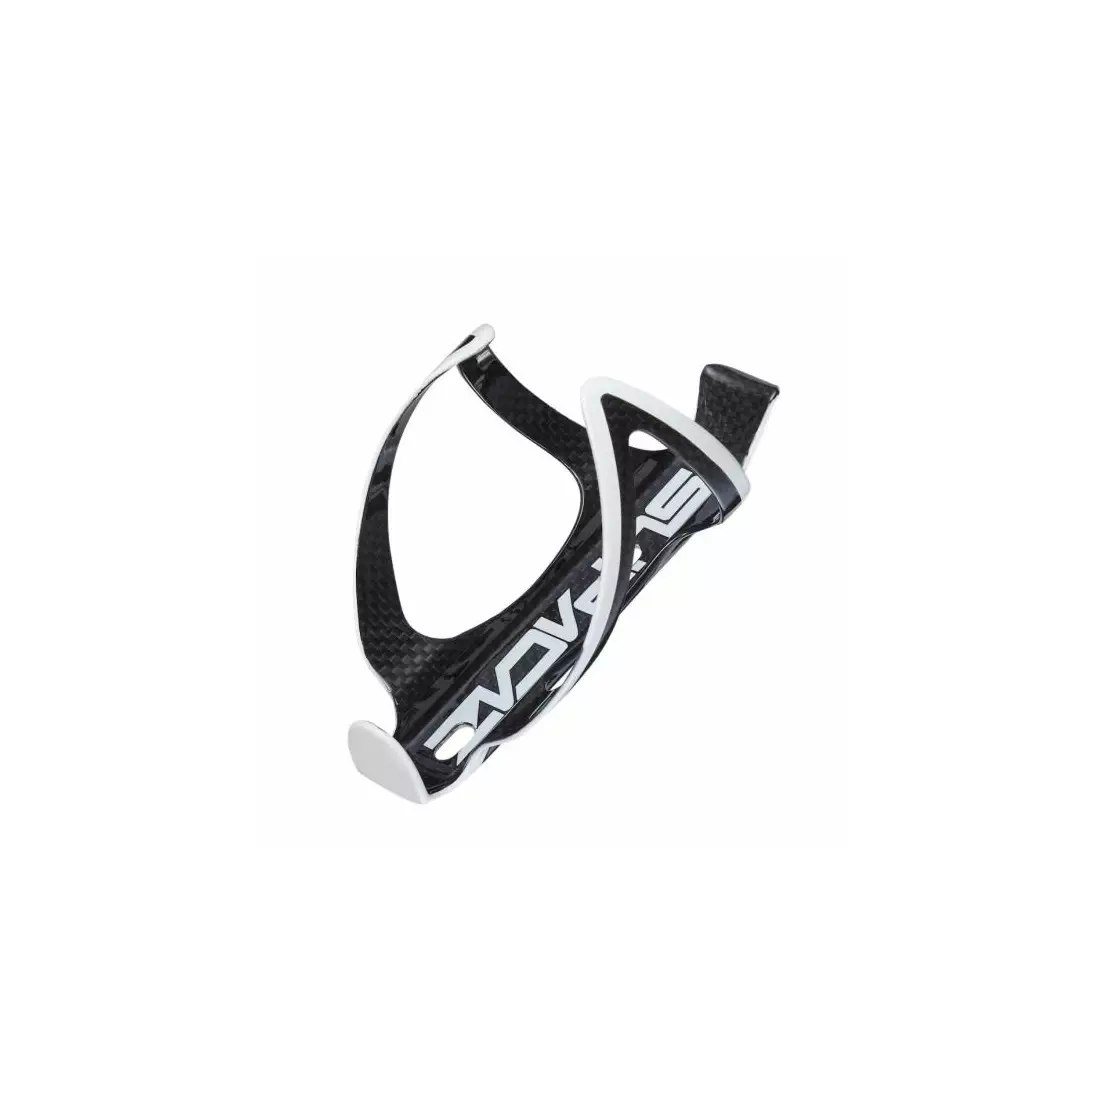 SUPACAZ bicycle water bottle cage FLY CARBON black/white CG-12